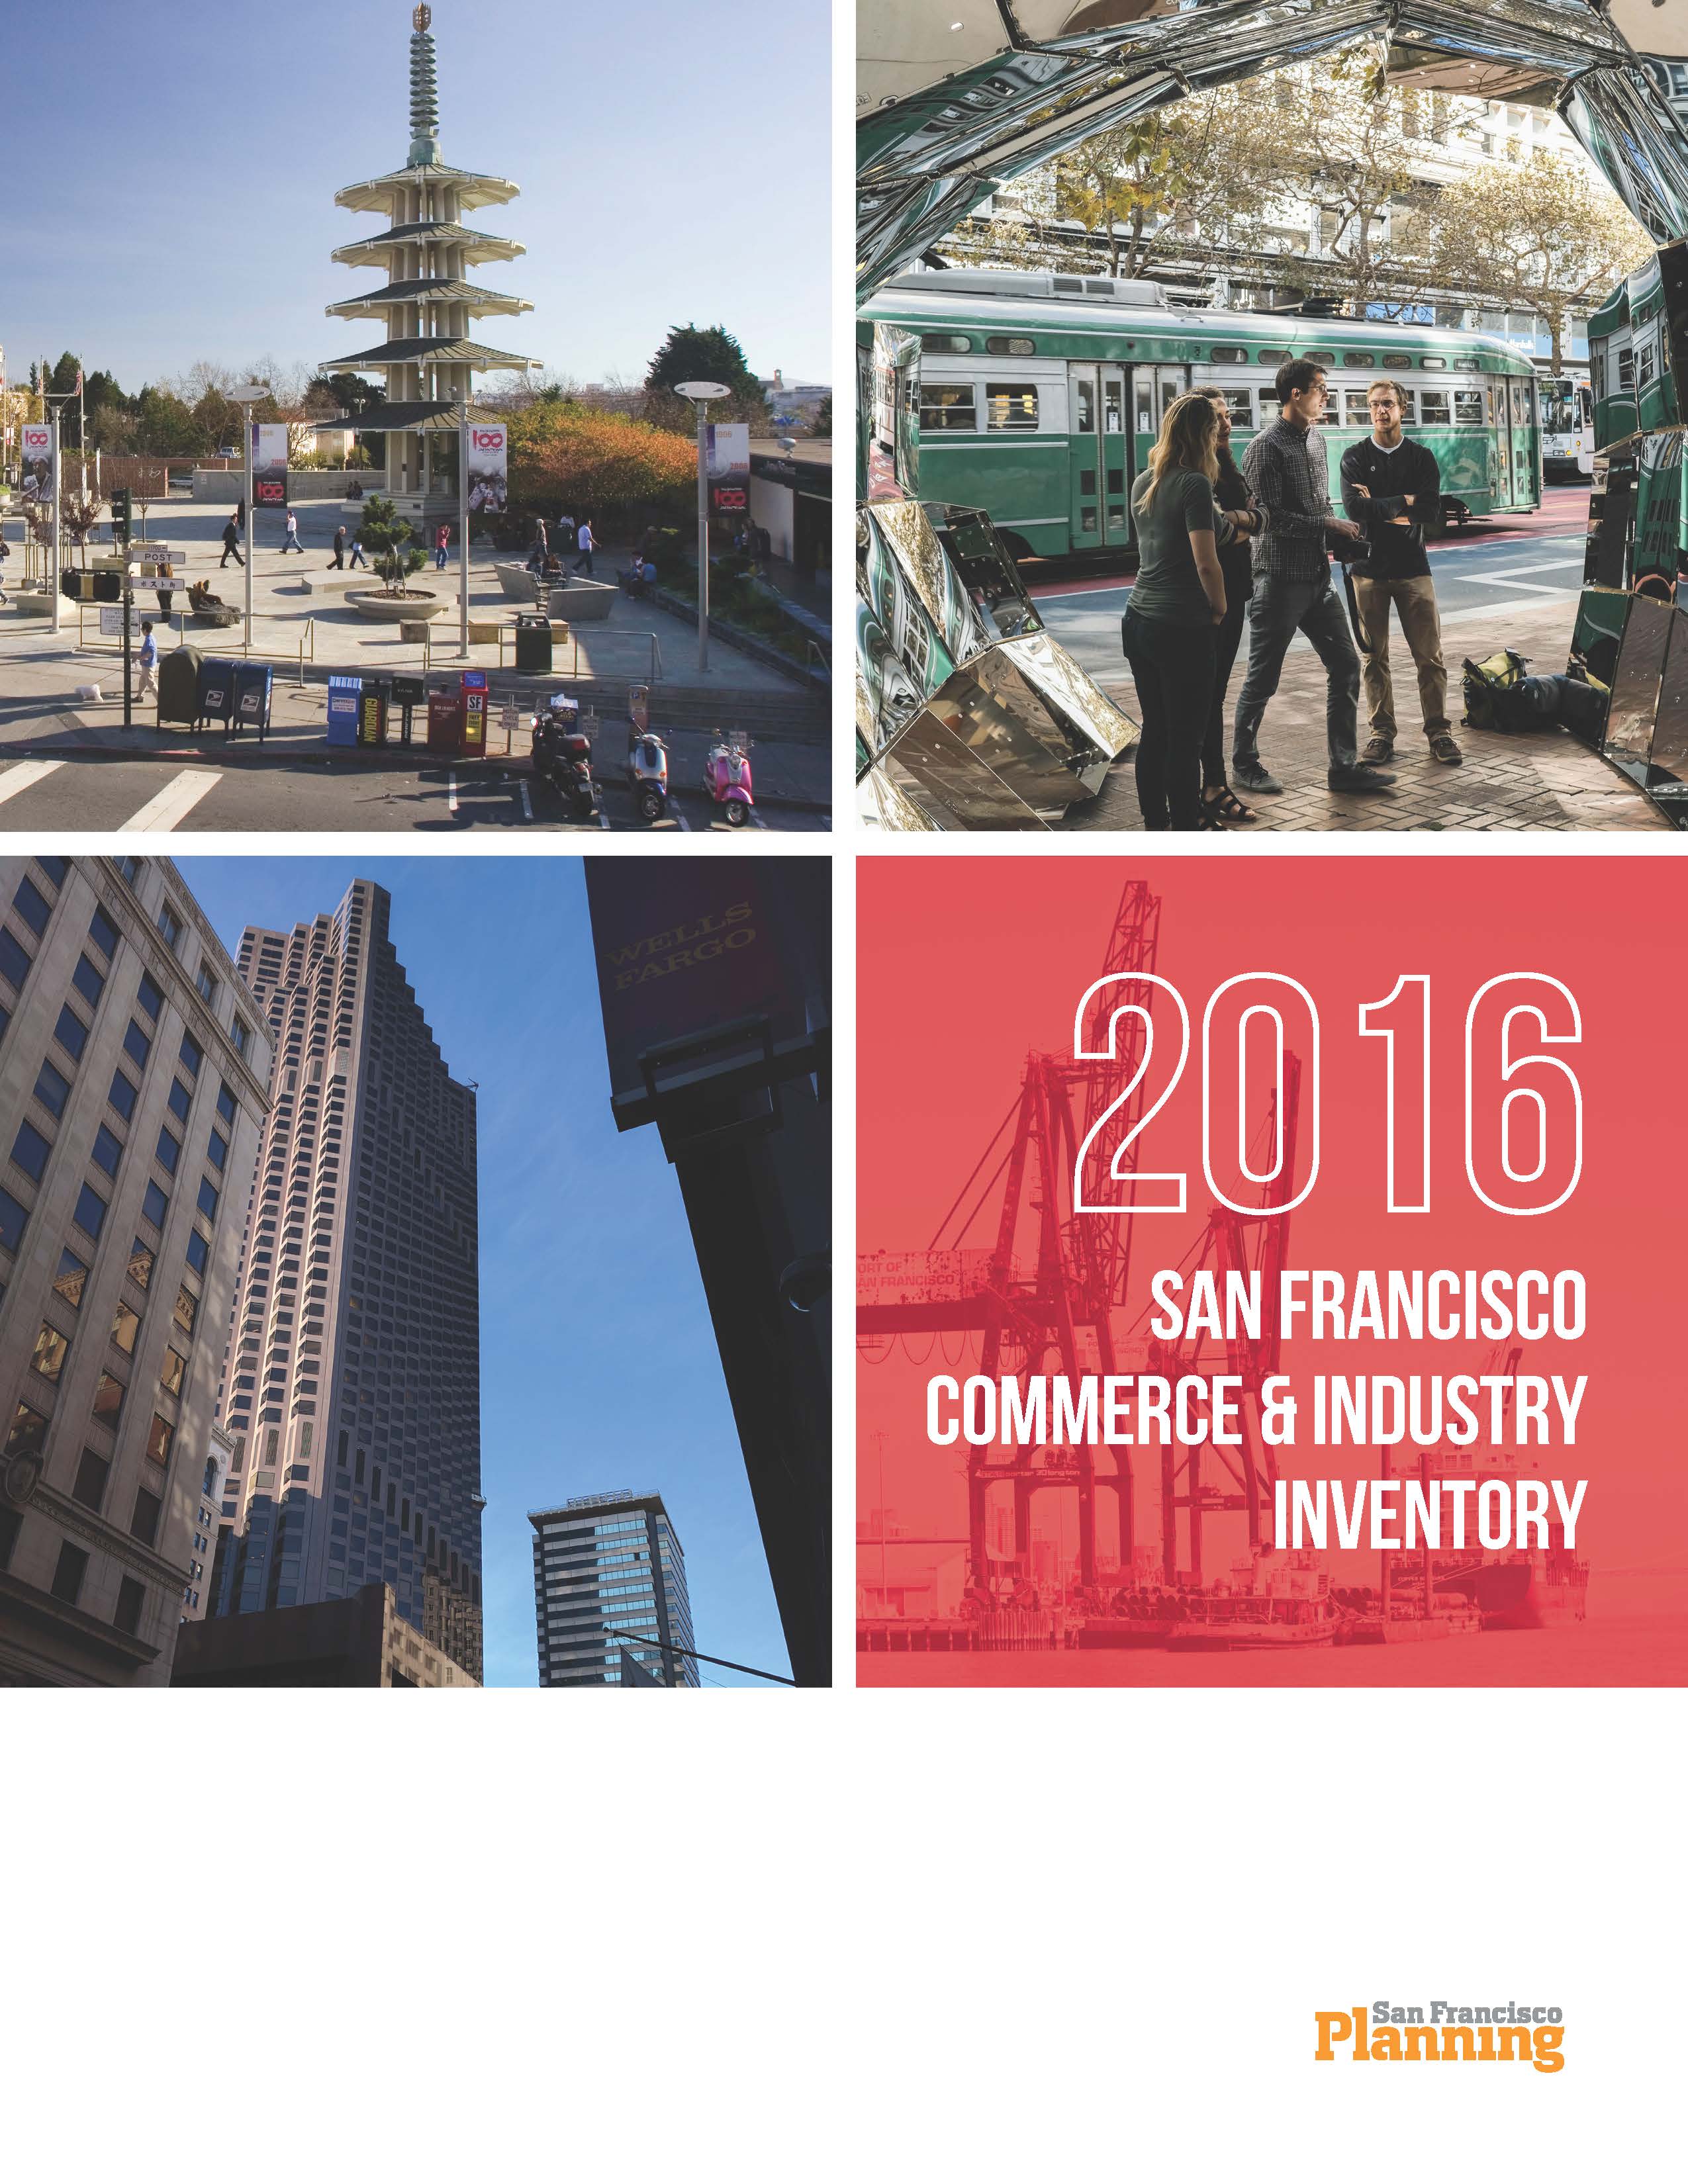 Cover Image for the 2016 Commerce & Industry Inventory Report